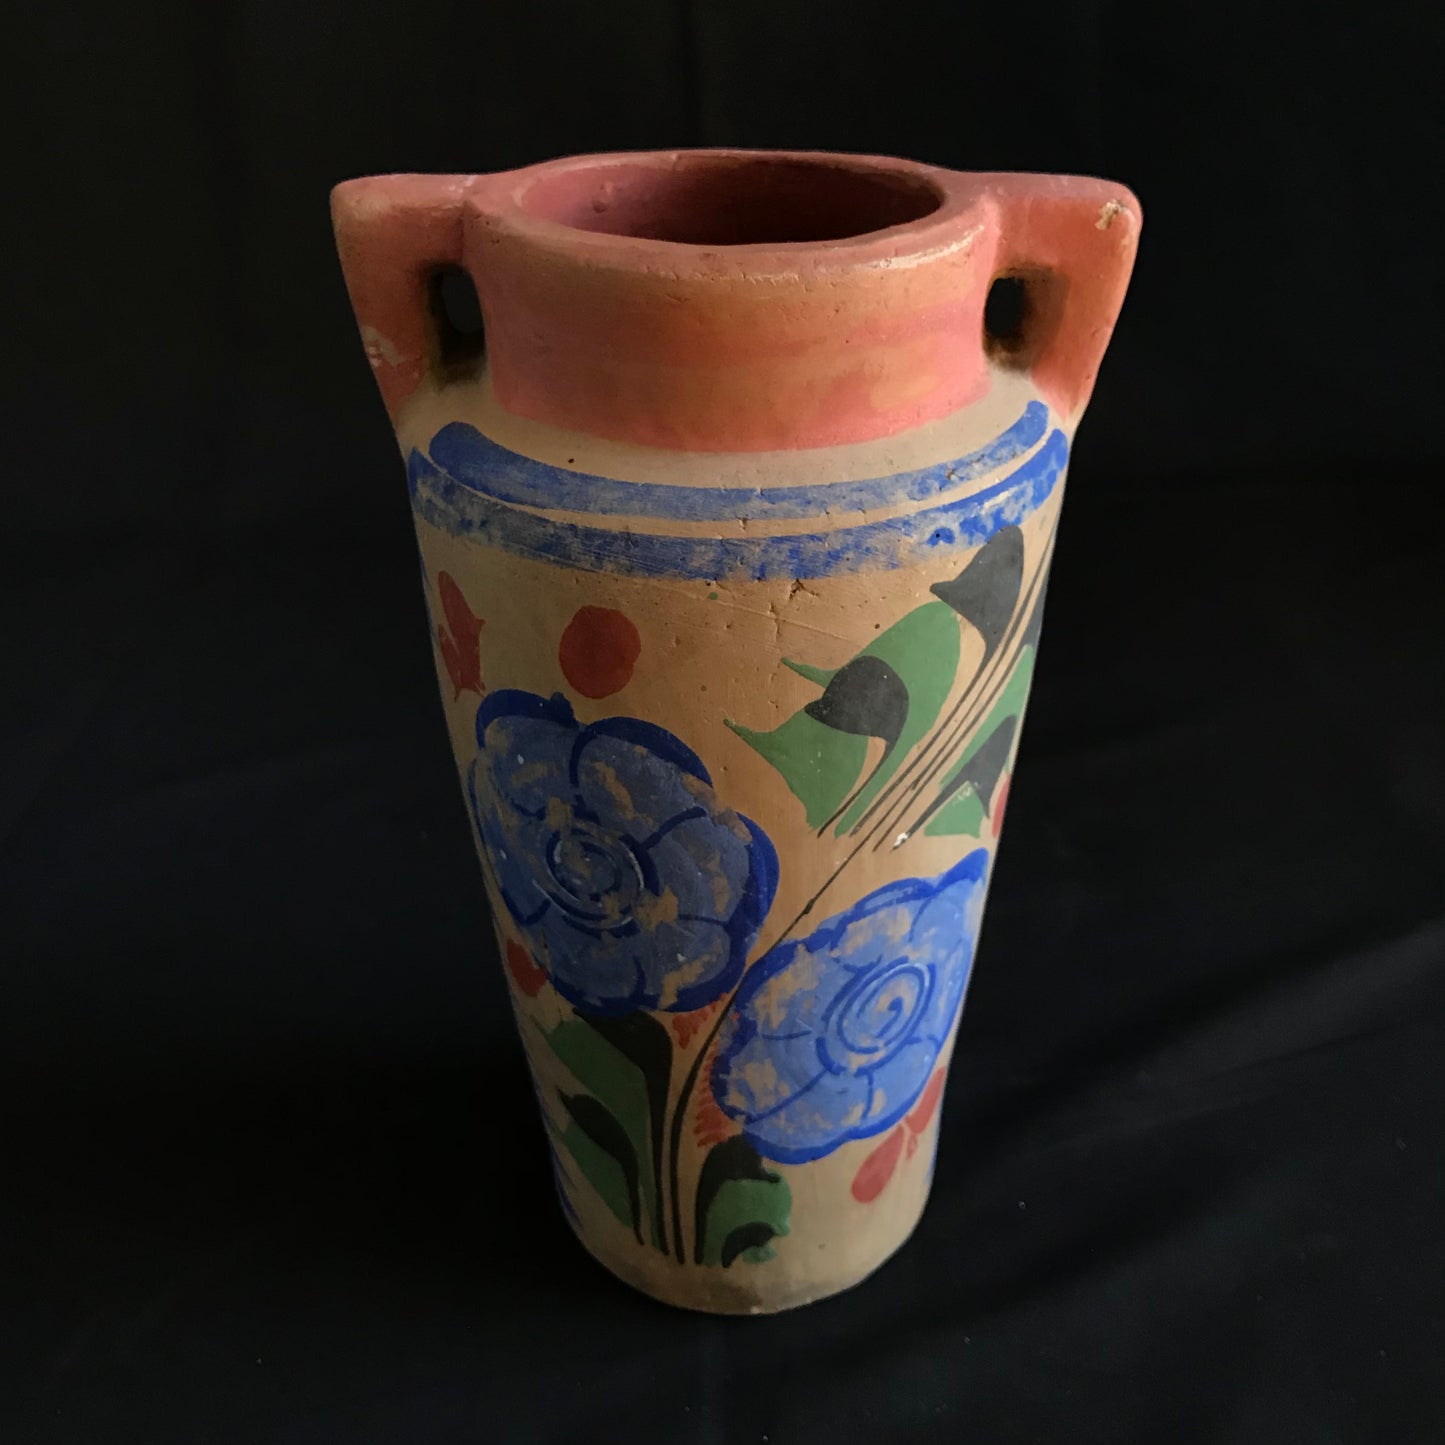 Vintage Mexican Pottery - Handled Vase with Blue Flower Pattern